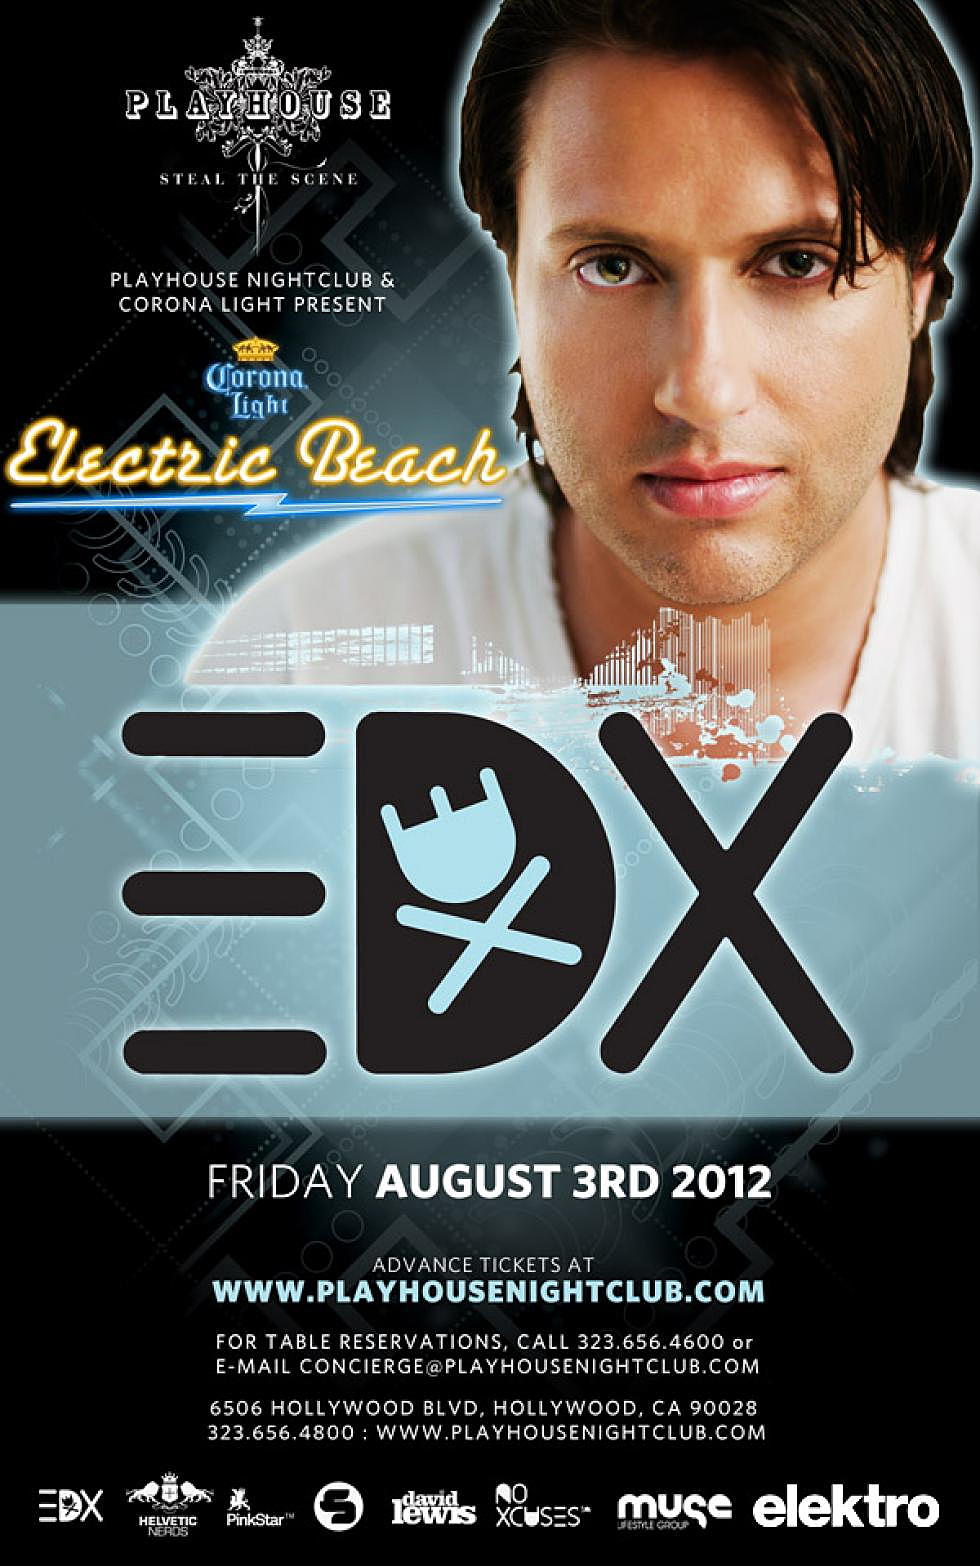 EDX @ Electric Beach x Playhouse Nightclub August 3rd + Contest to win tons of Prizes